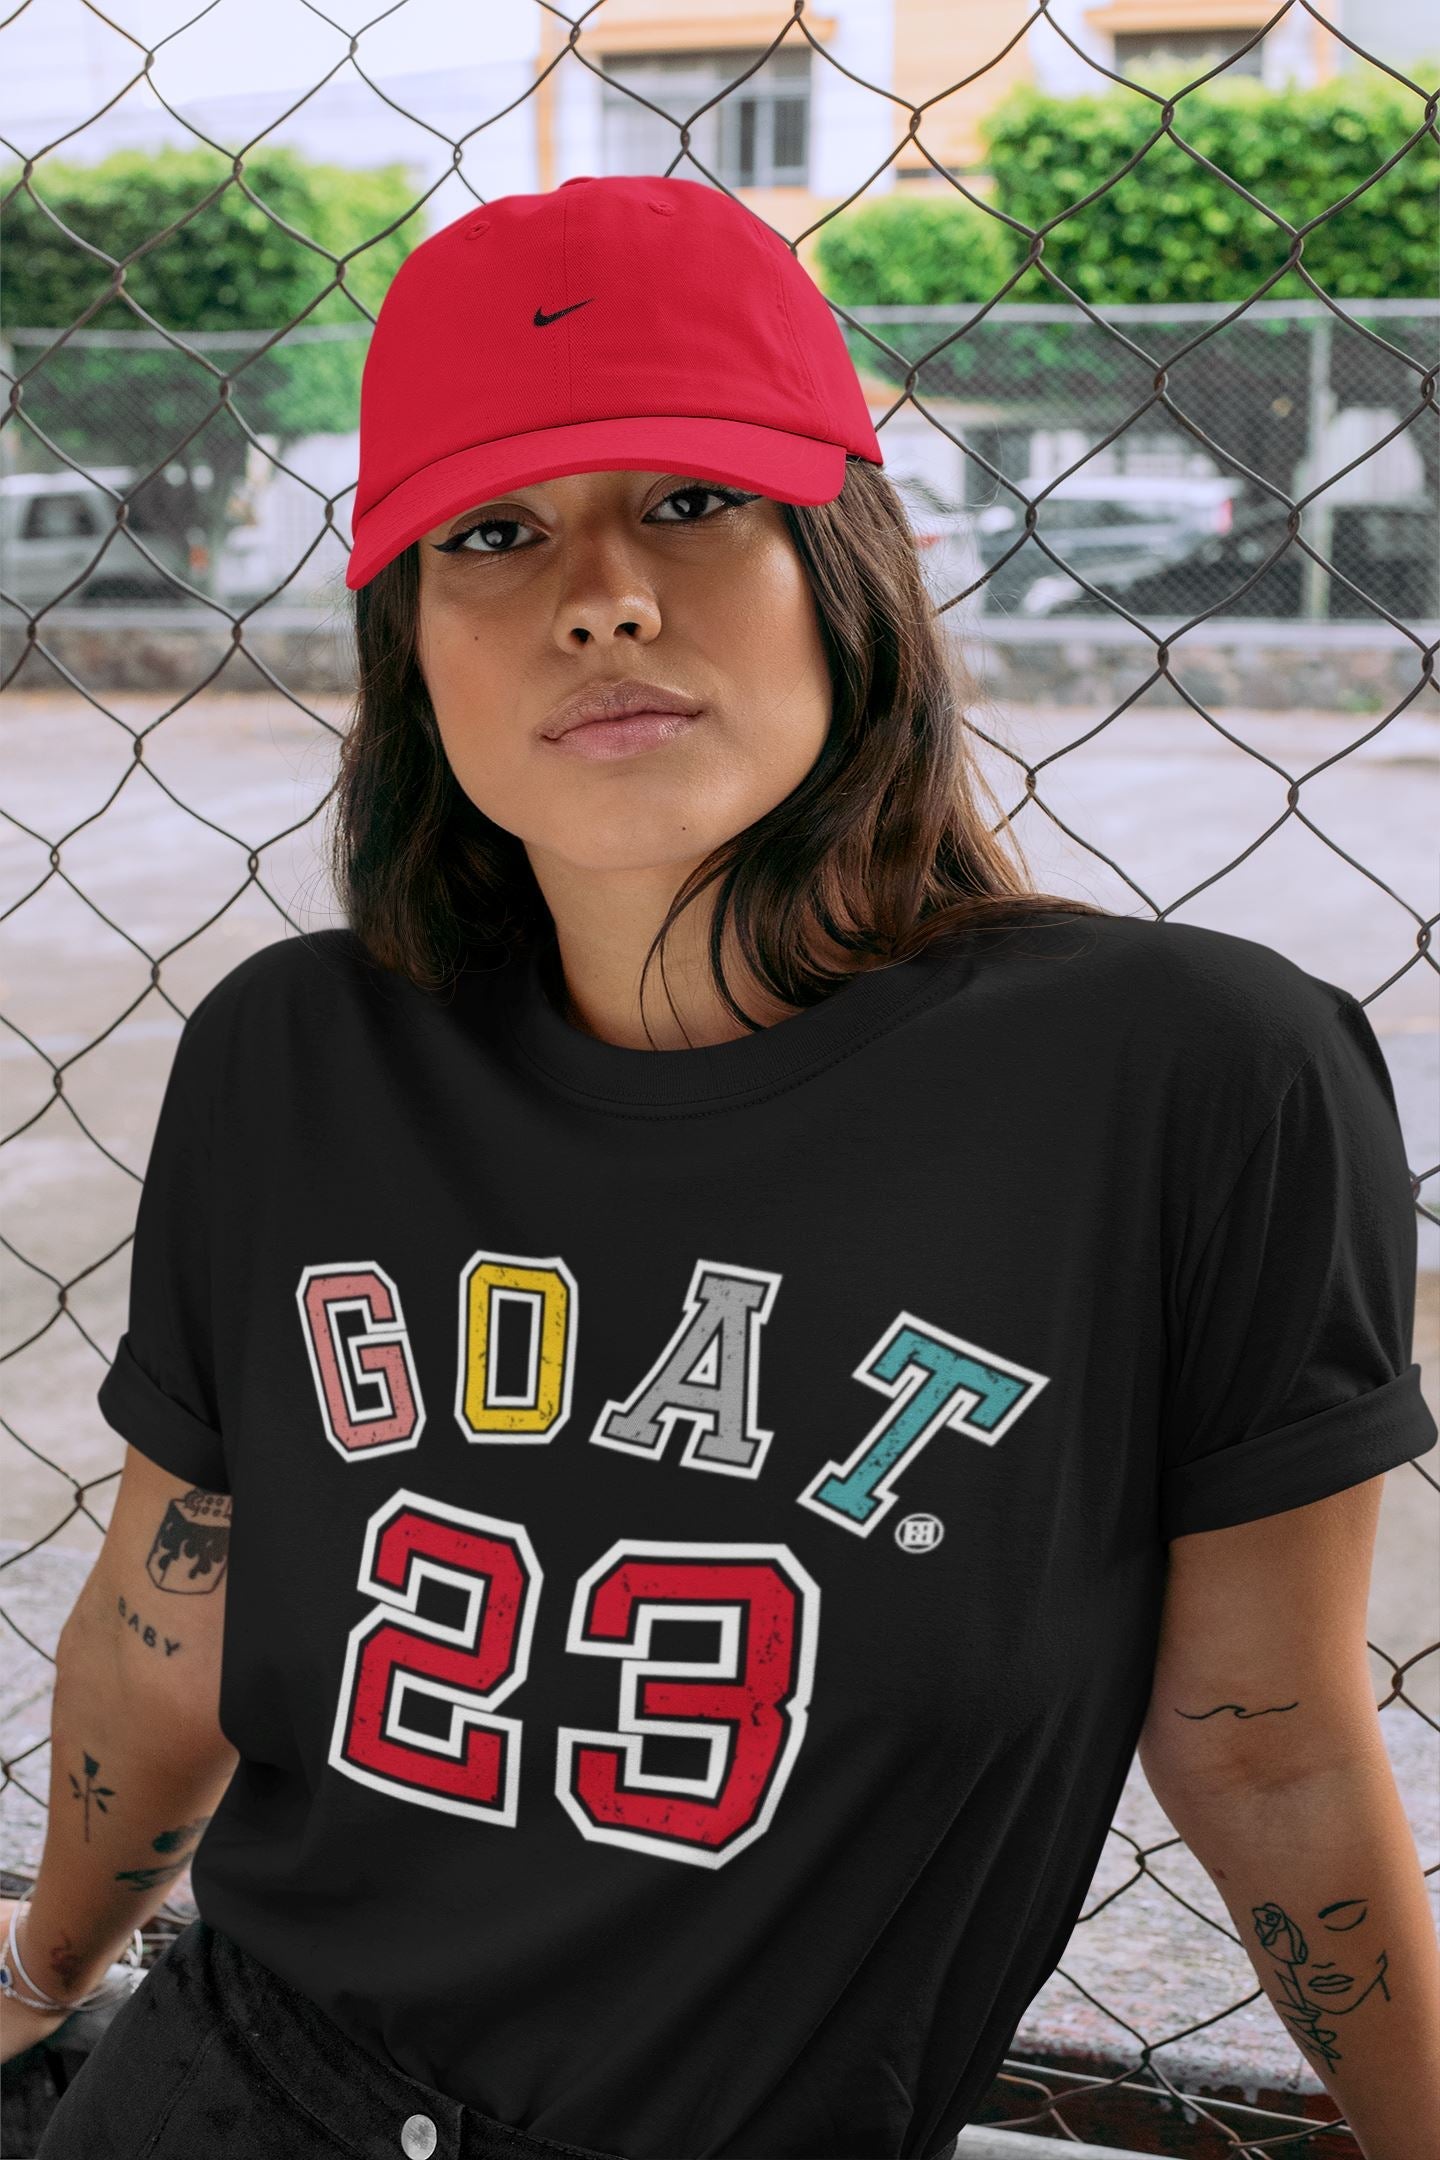 Yeezy 700 Hi-Res Red Sneaker Match Tees Goat 23 Sneaker Tees Yeezy 700 Hi-Res Red Sneaker Release Tees Unisex Shirts